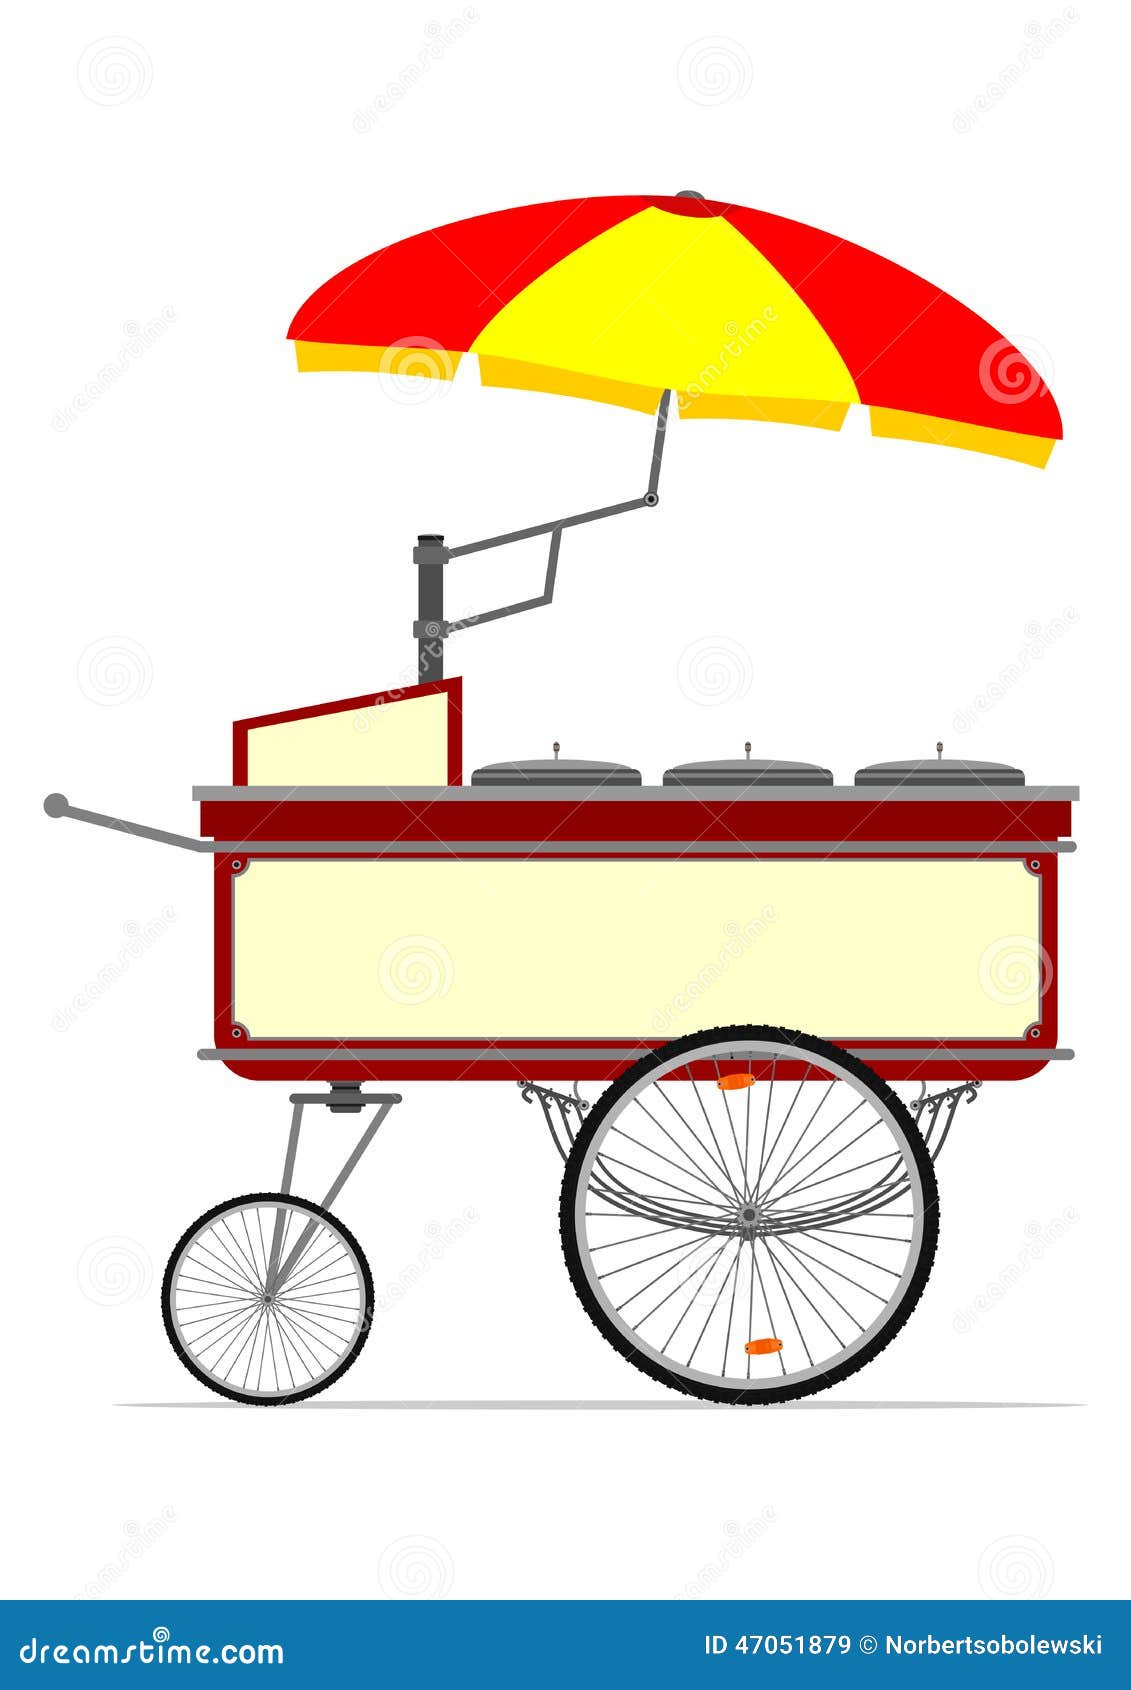 clipart hot dog stand - photo #10